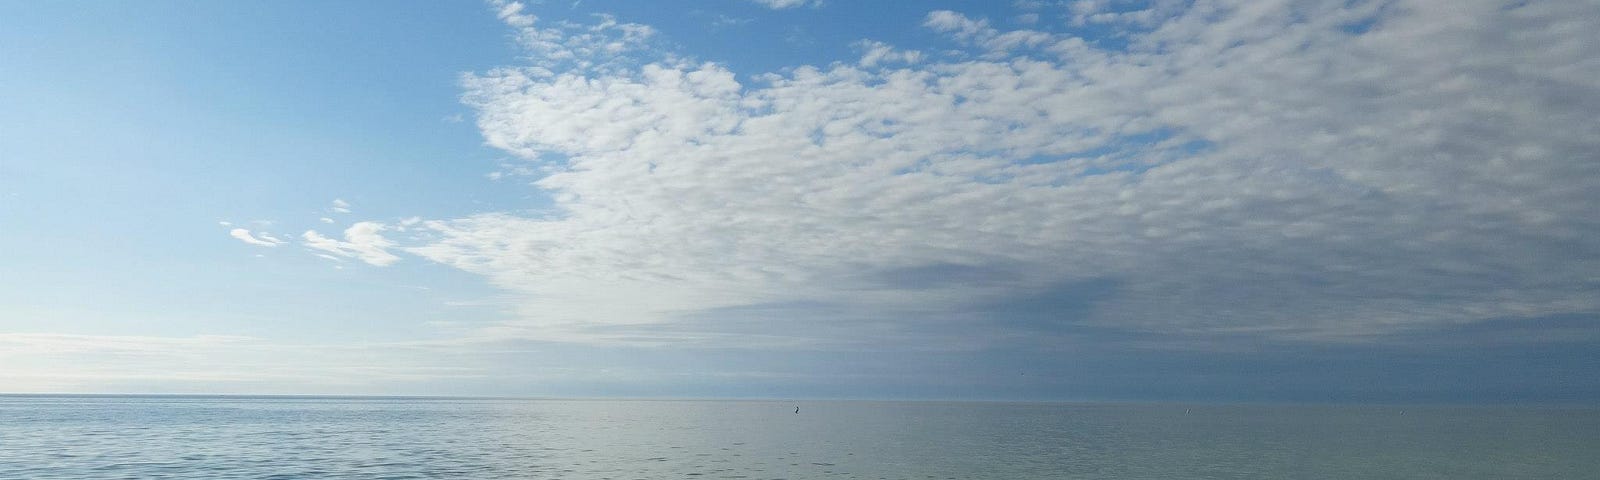 Calm ocean with blue sky and fluffy clouds